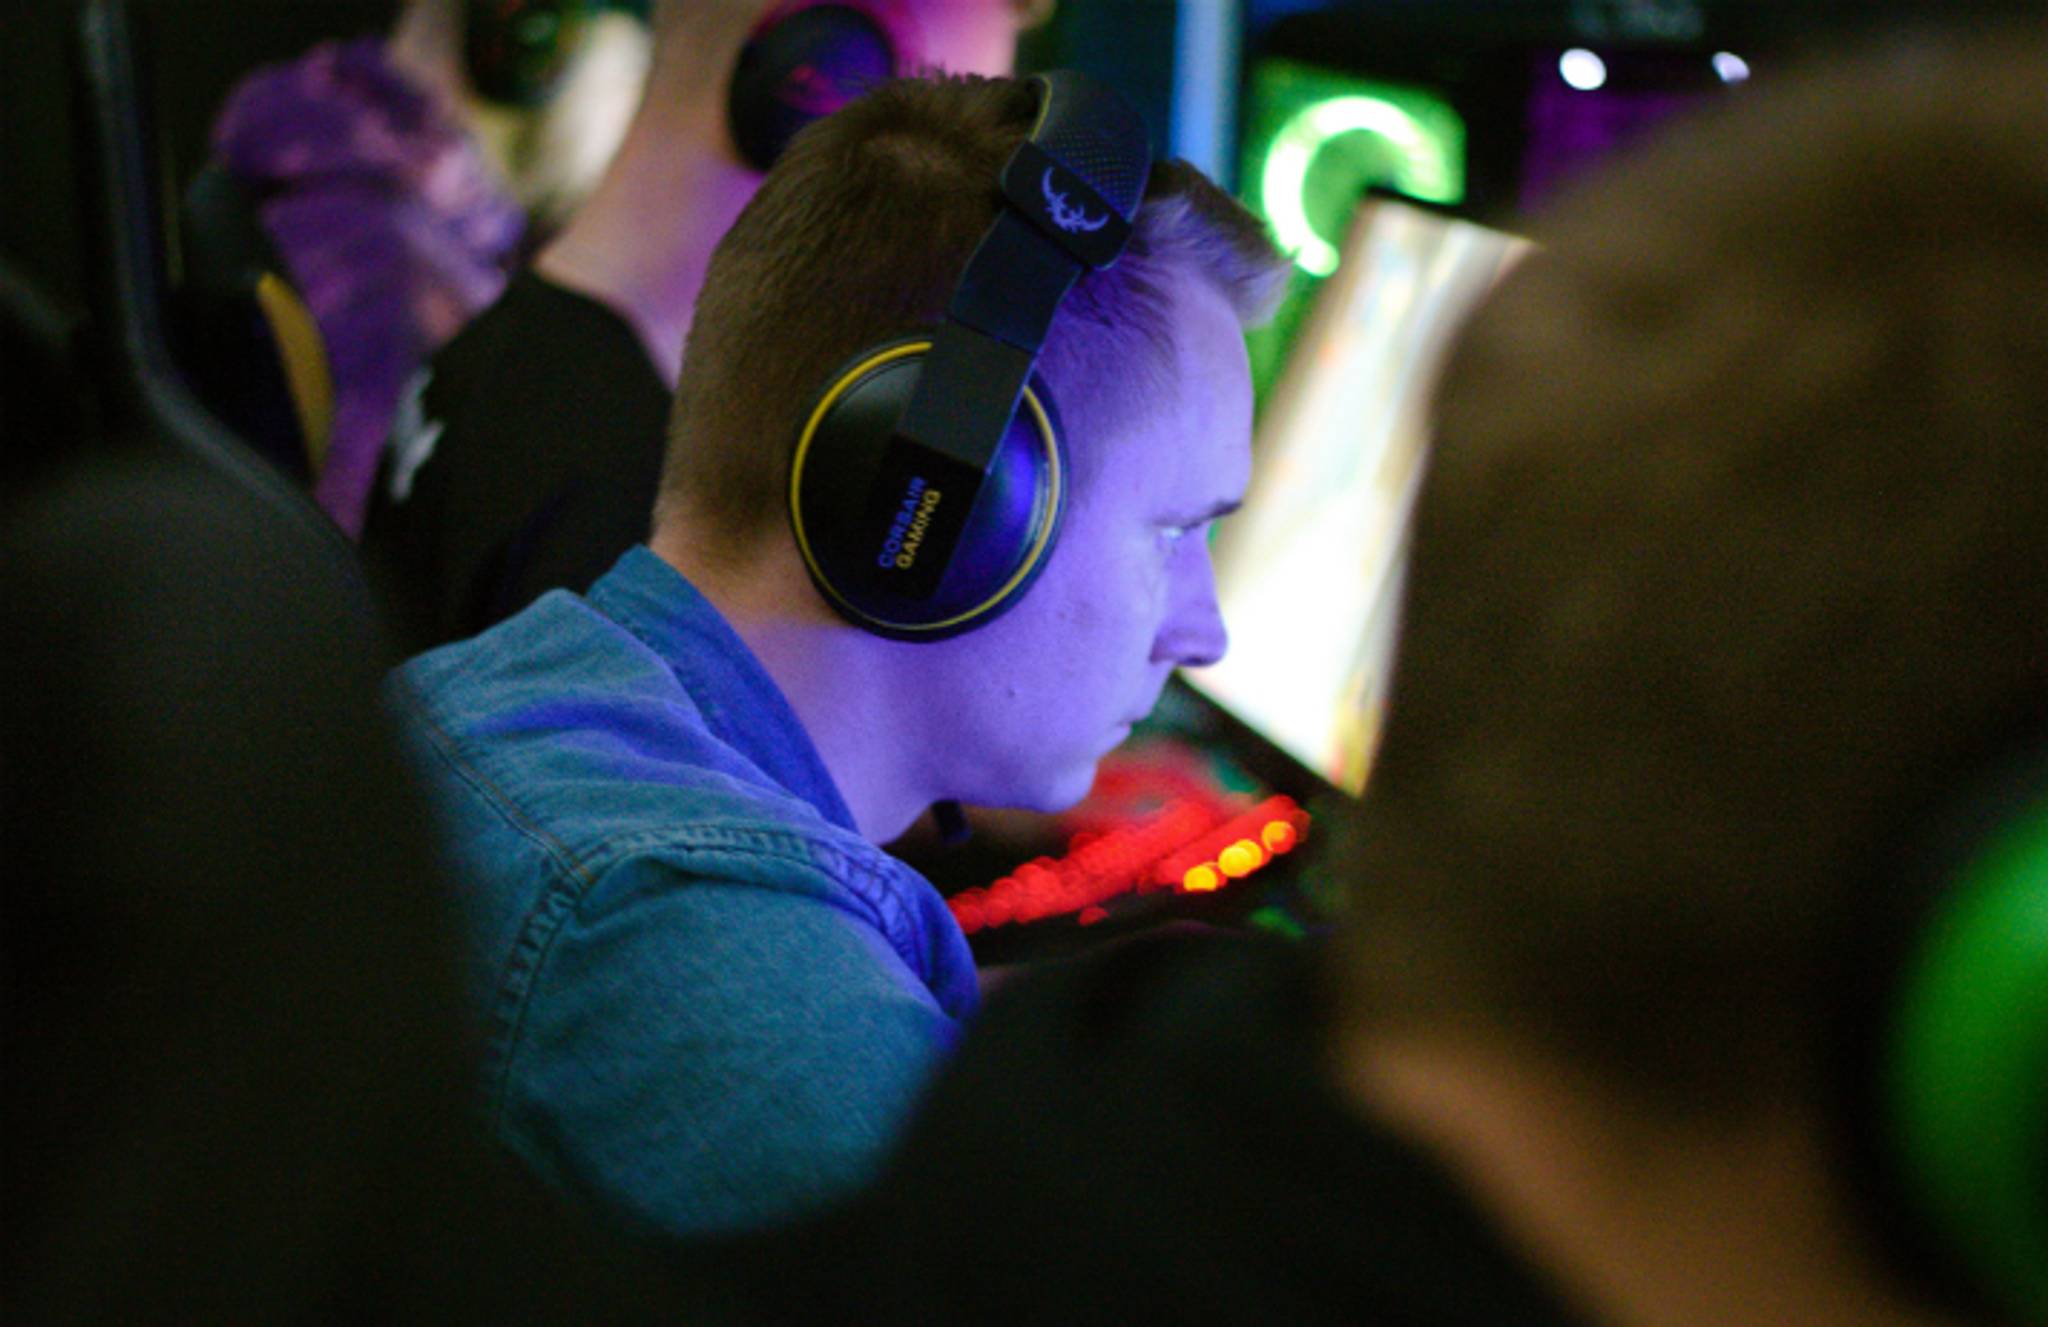 E-sports gain popularity in Oz as gaming gets accessible